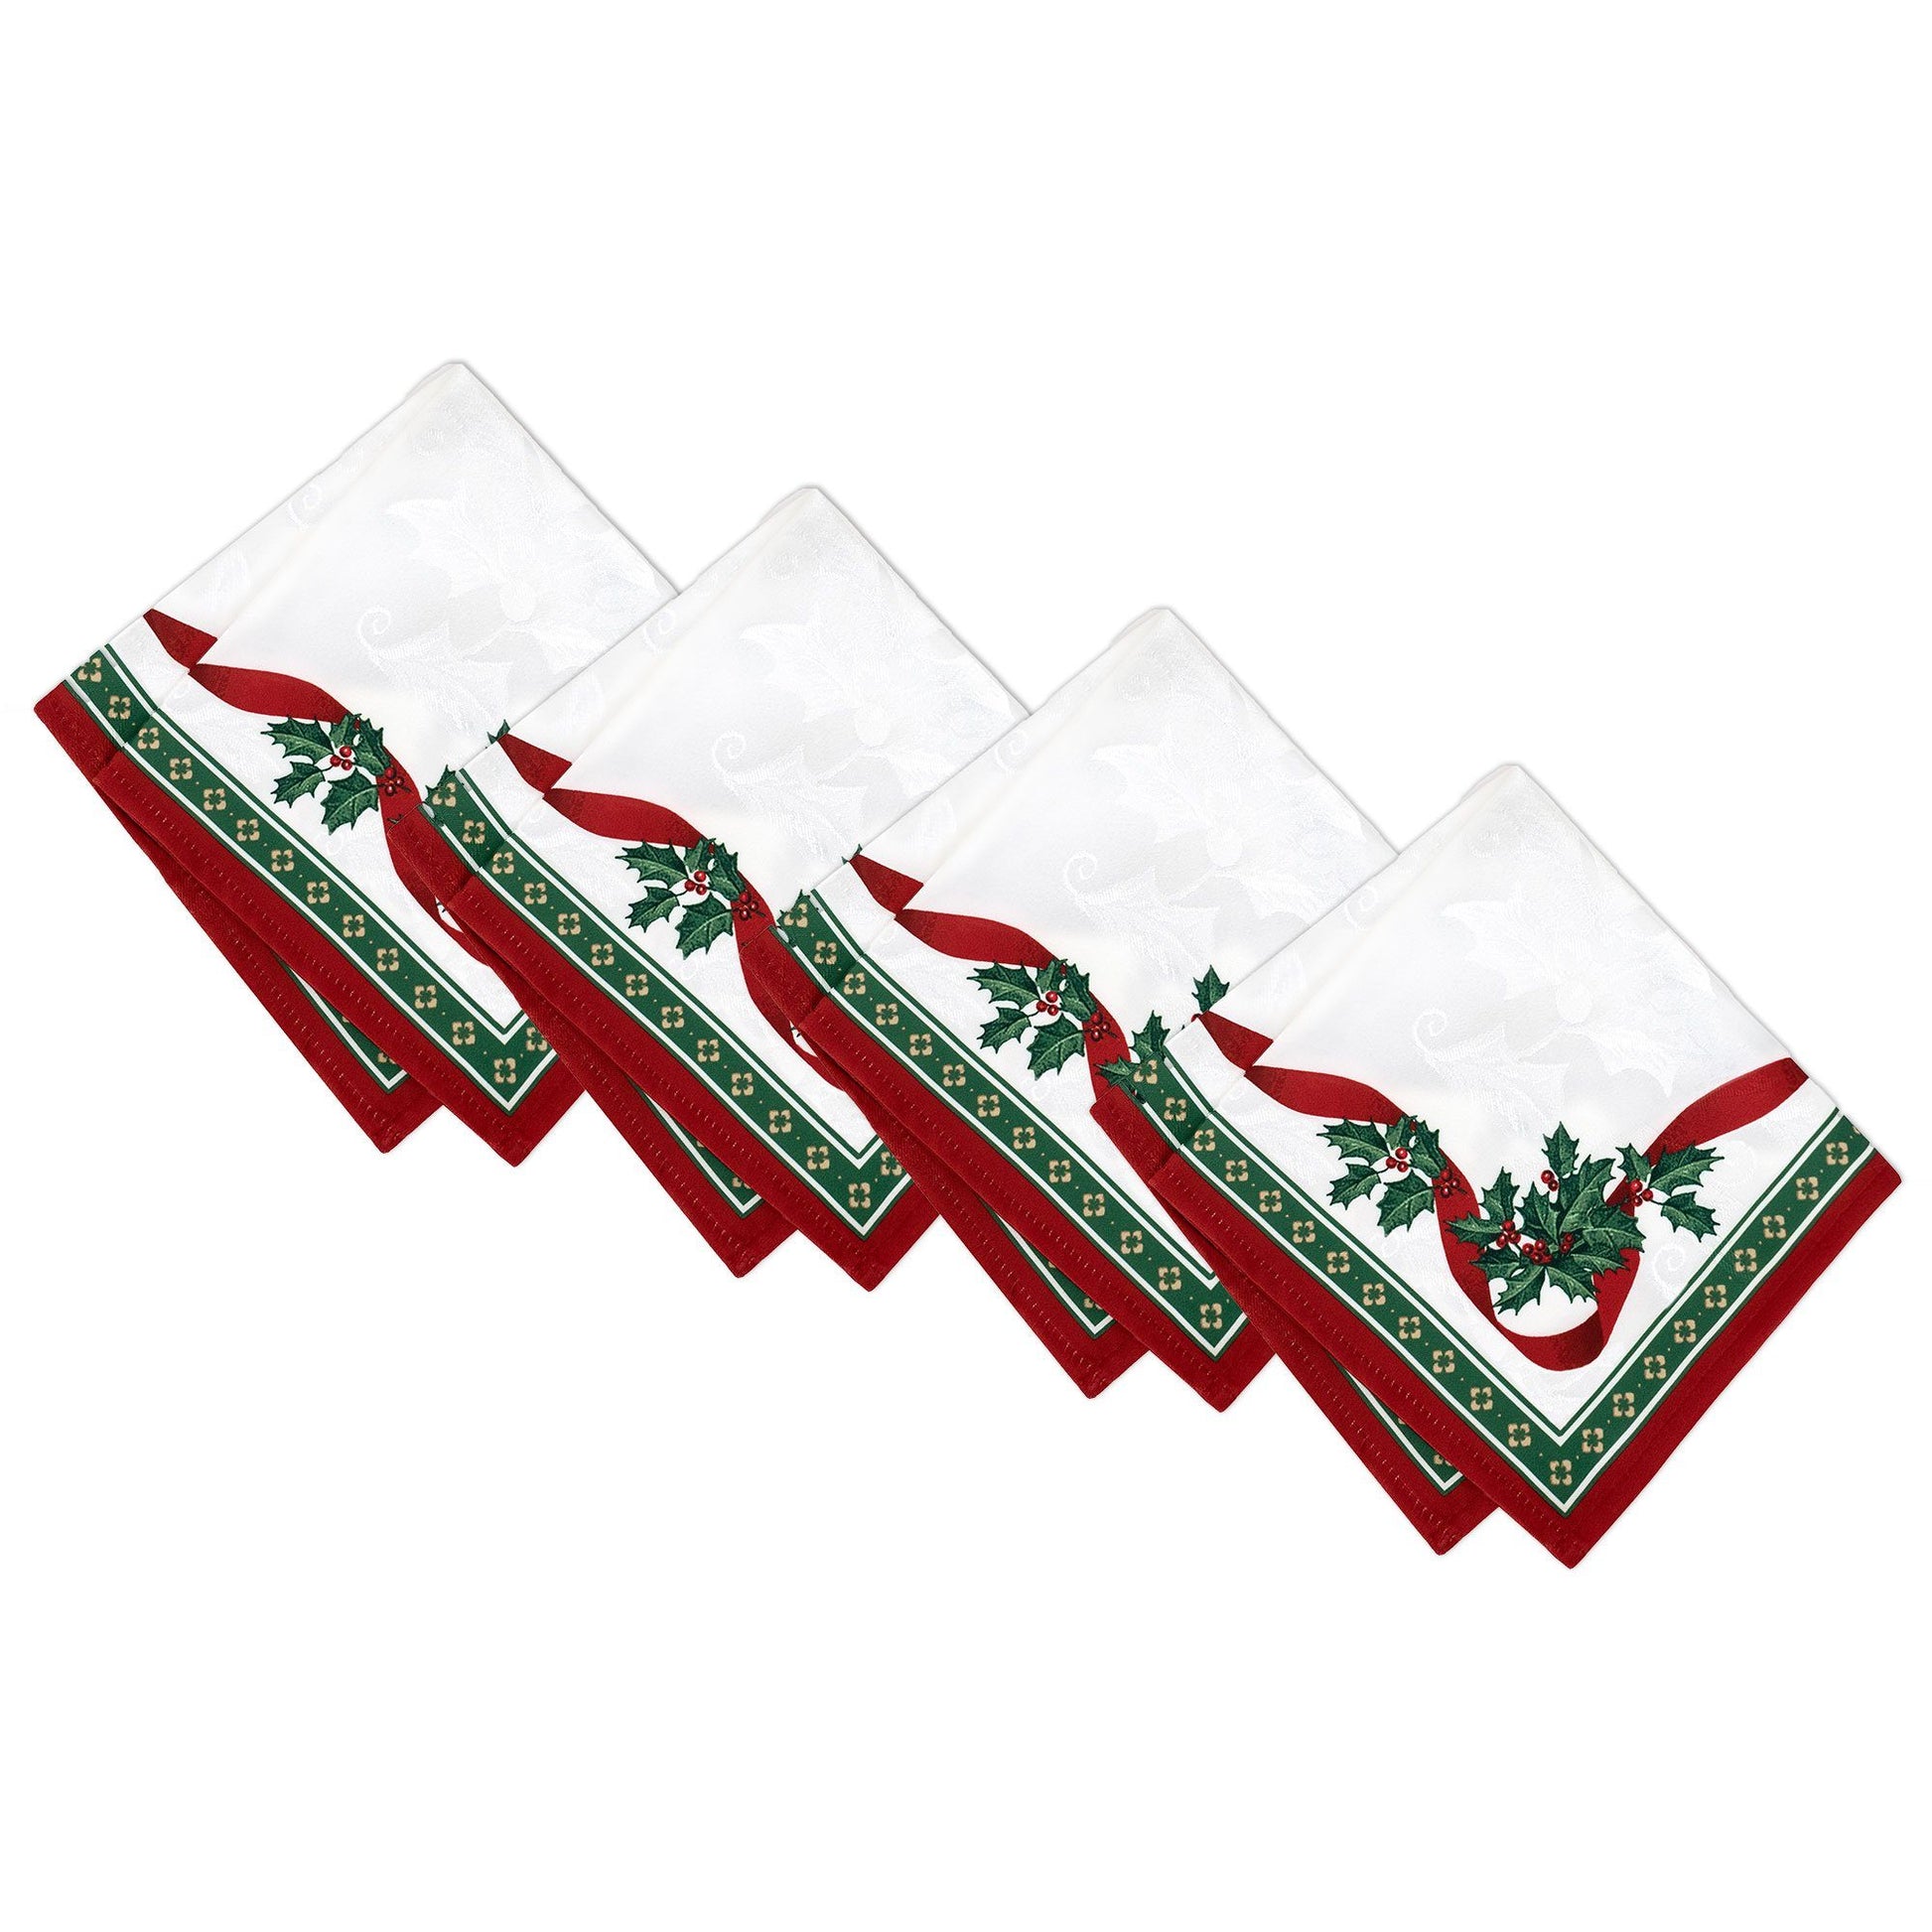 White holly damasks napkin set of 4 with red/green border and red ribbon design trim with holly sprigs